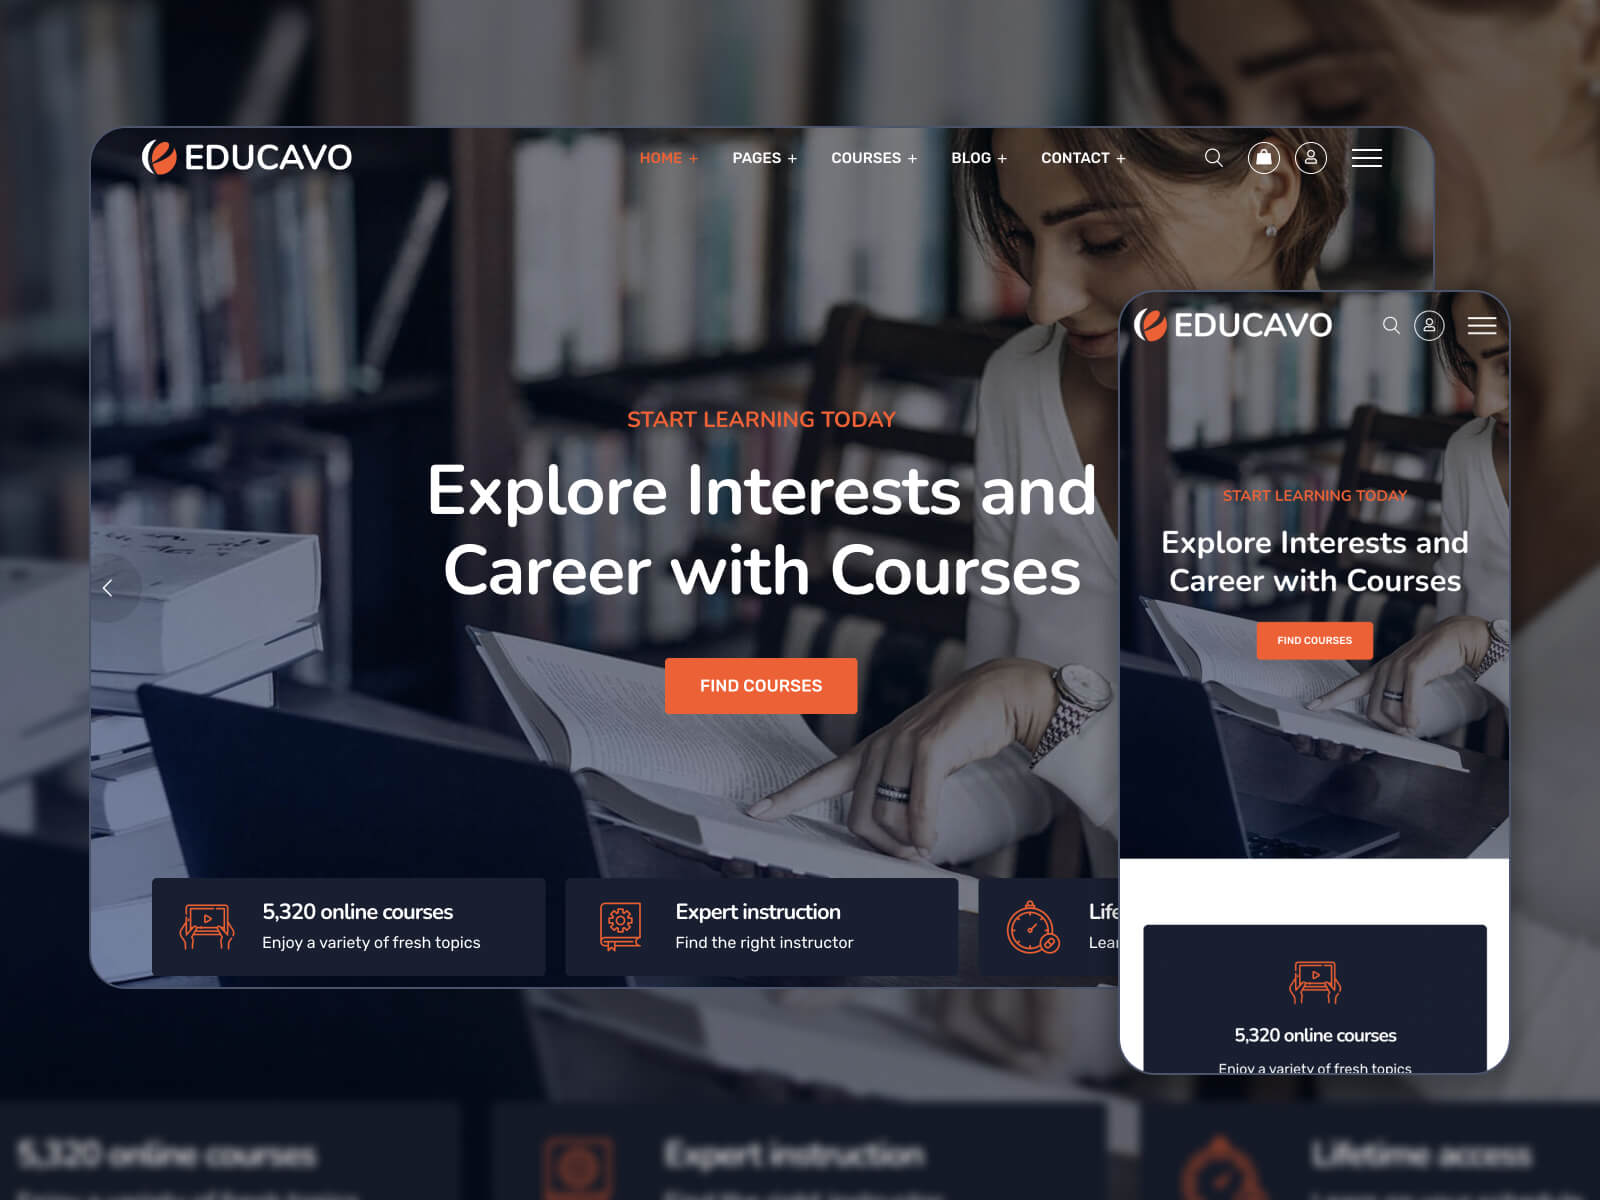 Picture of Educavo - versatile layout online course WP theme in tomato, dimgray, darkslategray, black, and whitesmoke color palette